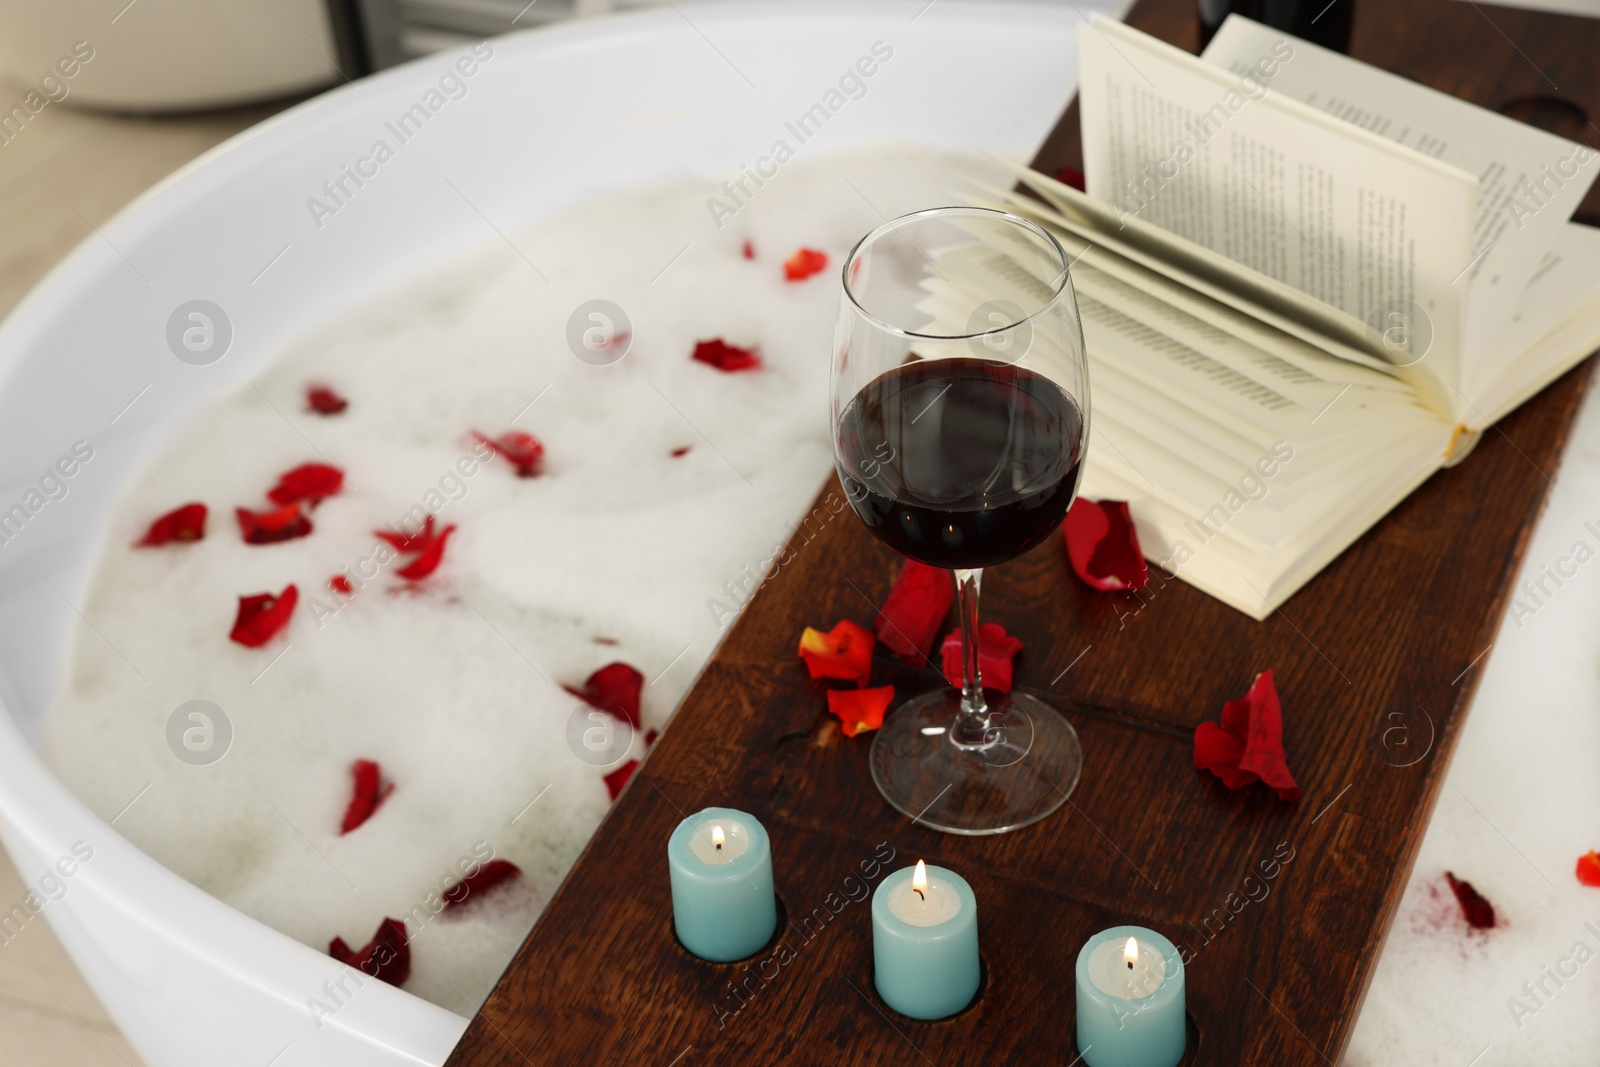 Photo of Wooden board with glass of wine, book, burning candles and rose petals on bath tub